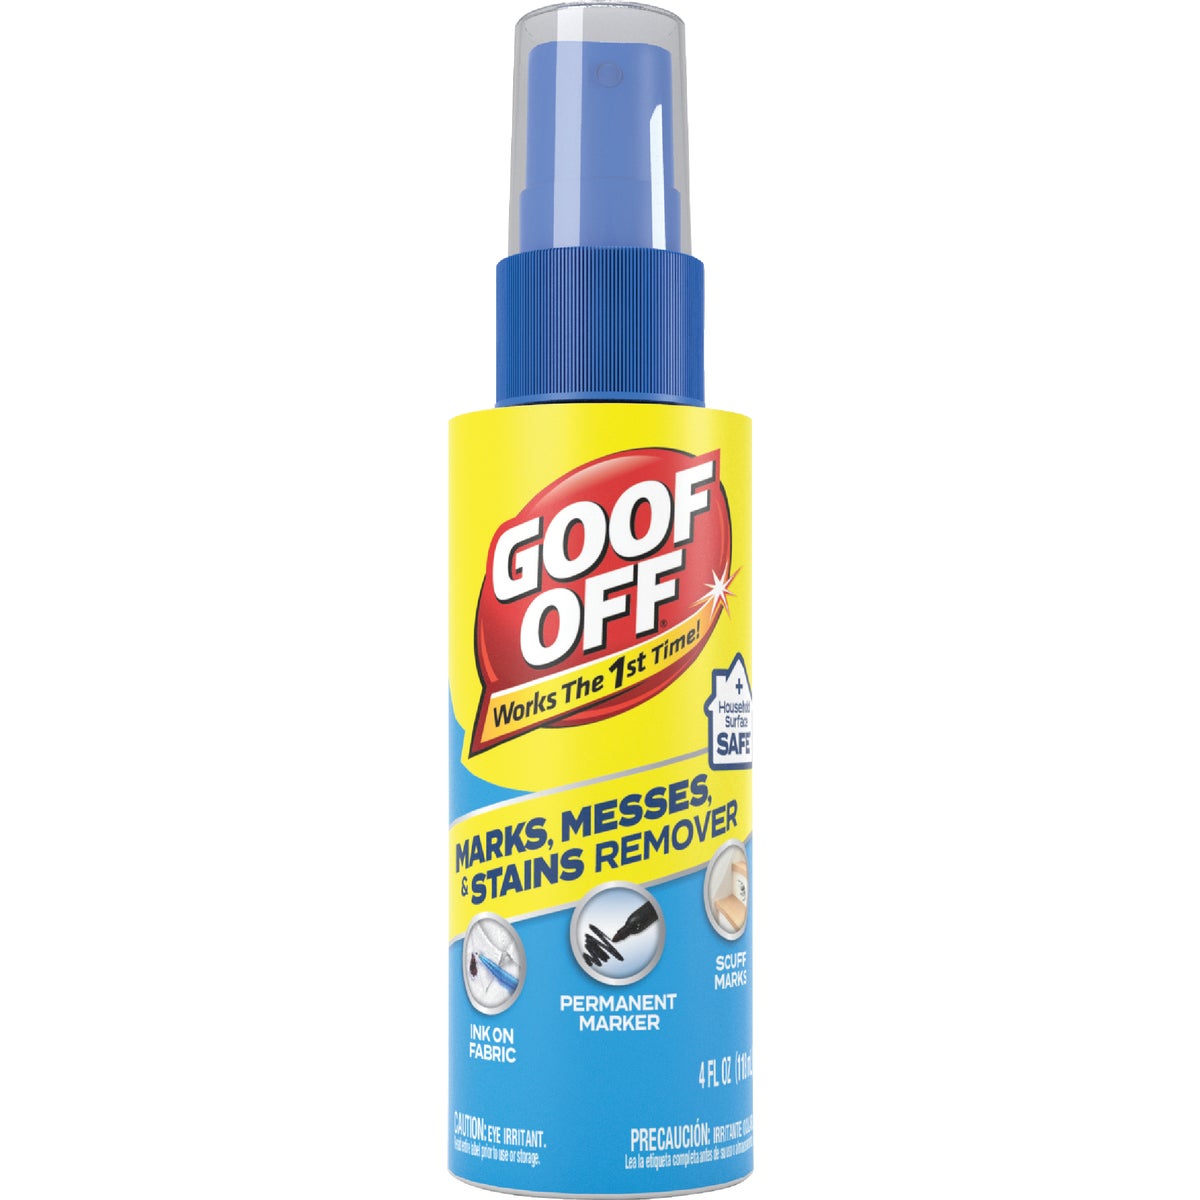 Item 620475, Goof Off heavy-duty spot remover and degreaser works like magic to quickly 